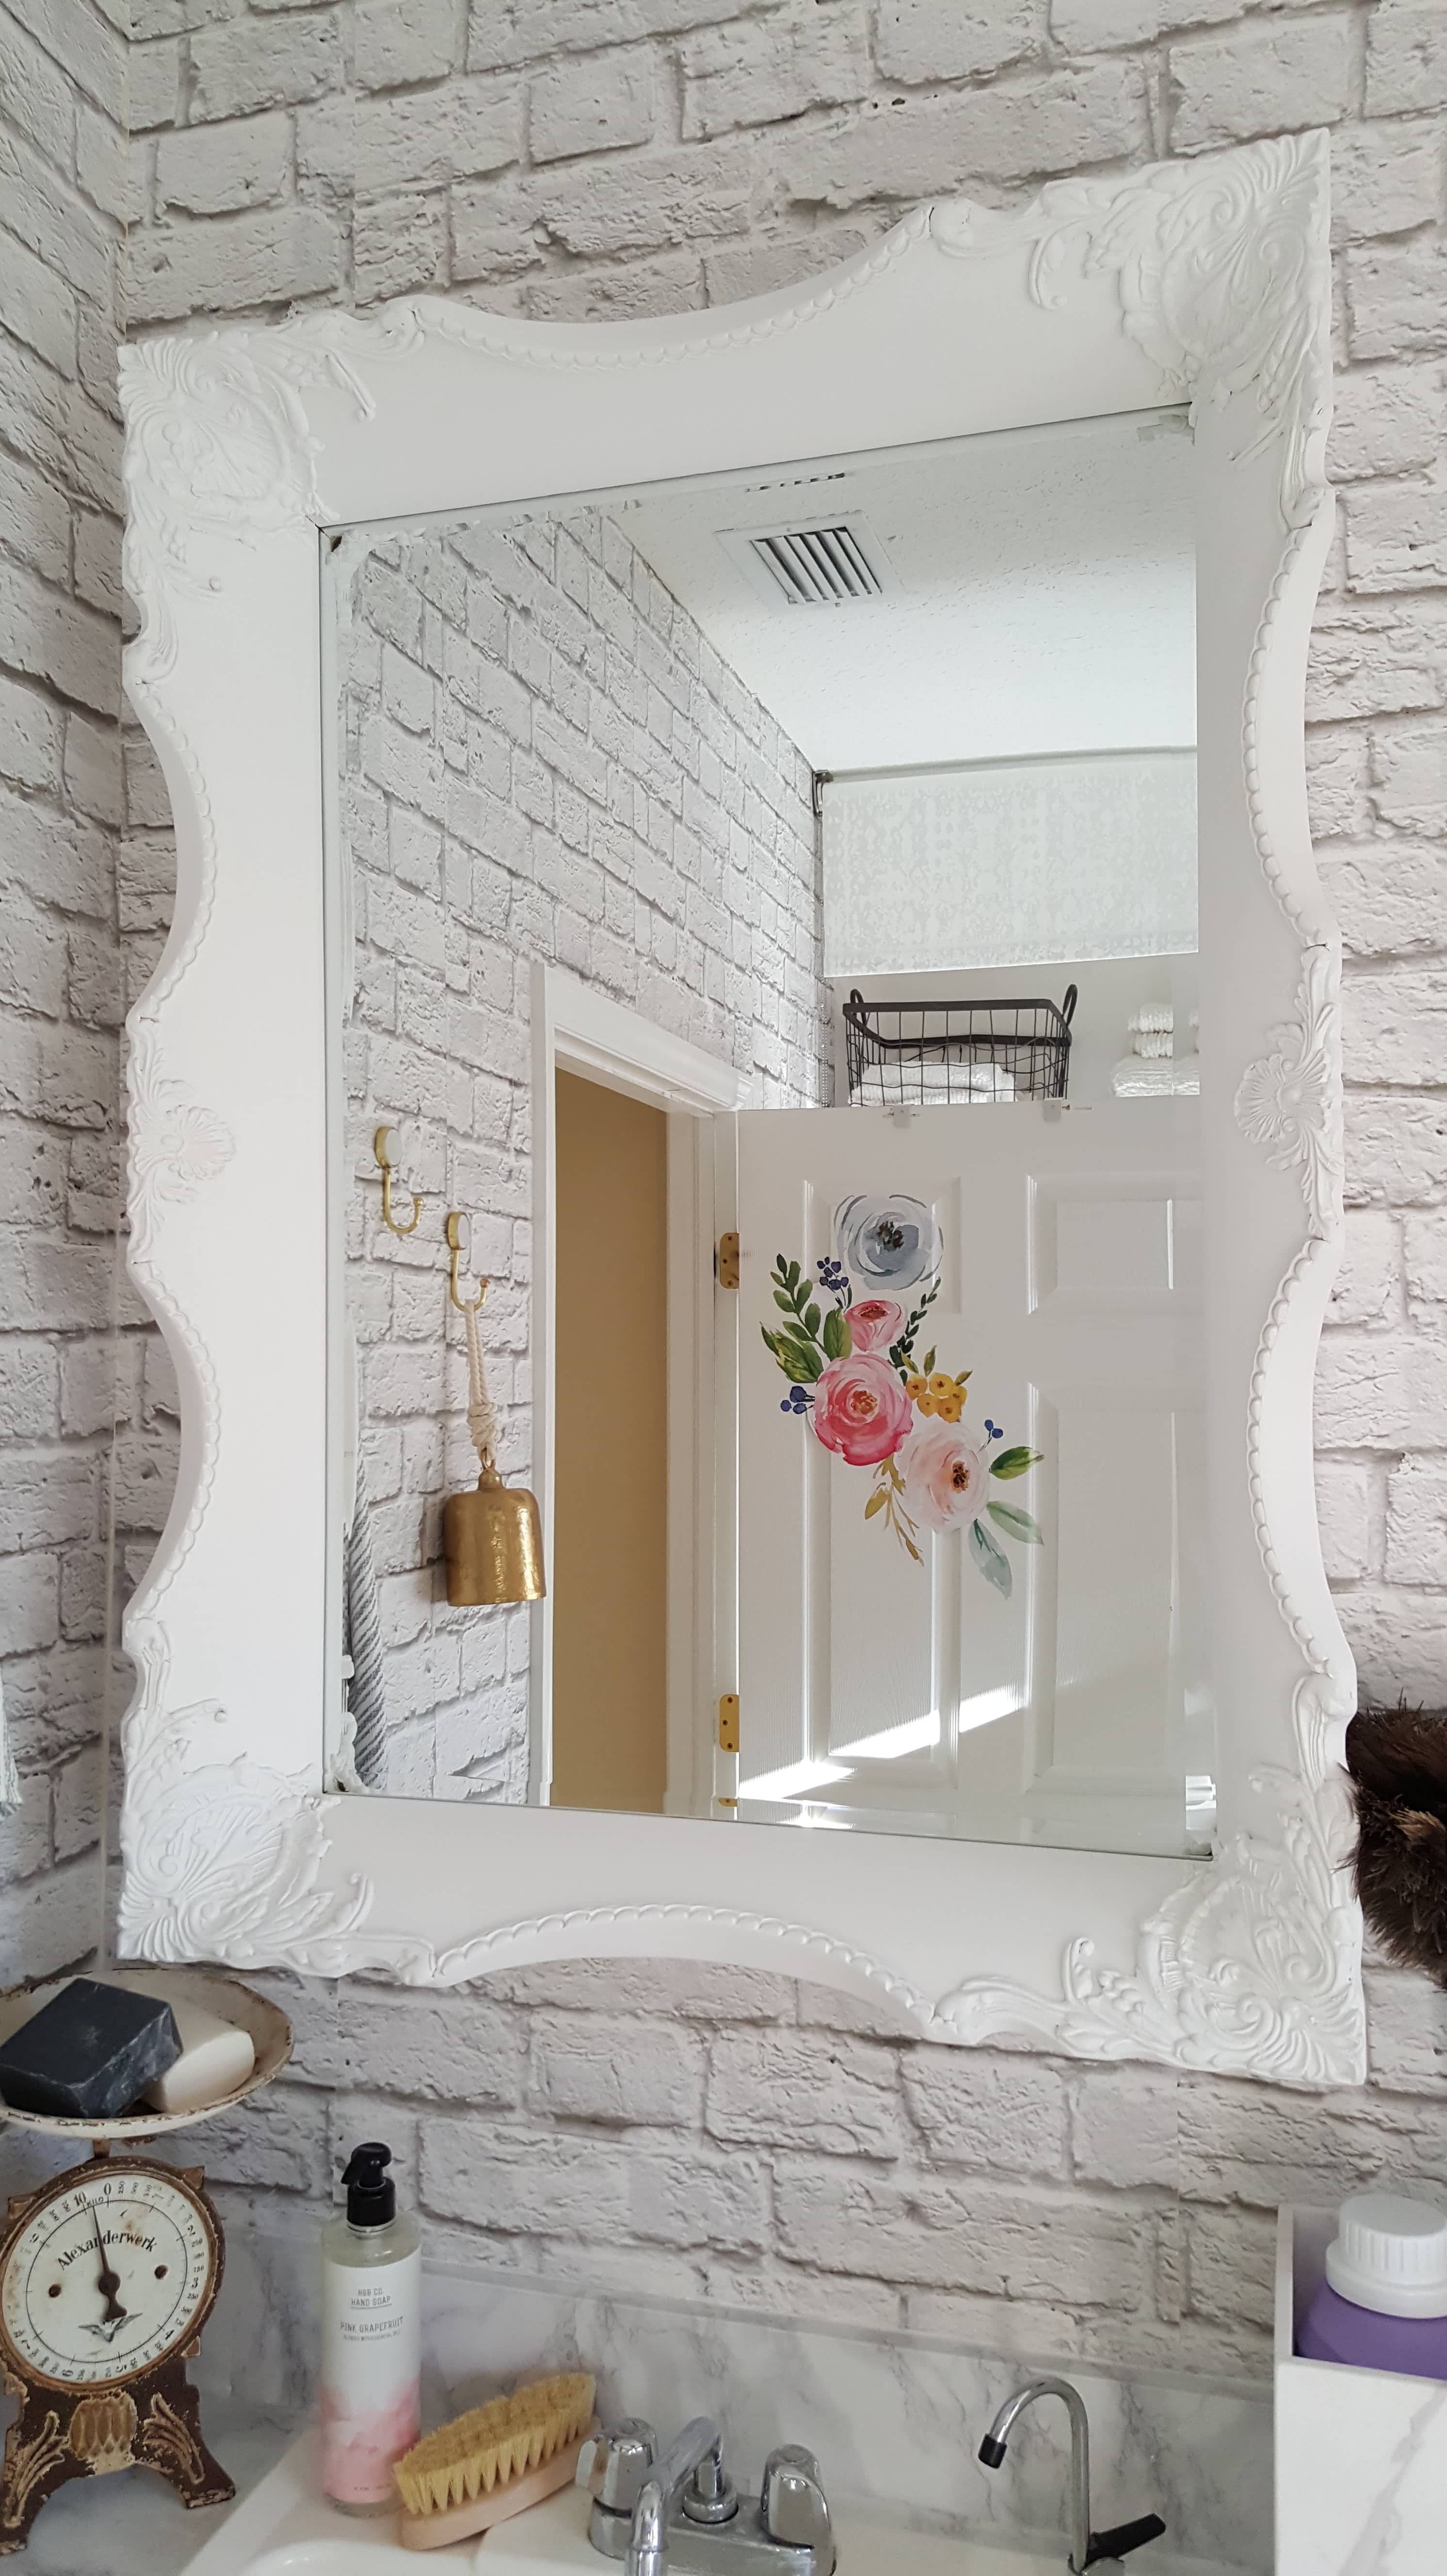 Beesnburlap One Room Challenge Urban Industrial Vintage Glam Laundry Room Reveal Makeover DIY Inspiration Brick Wallpaper Wood Wall Modern Farmhouse Decor White Sink Vintage Scale Pottery Flowers